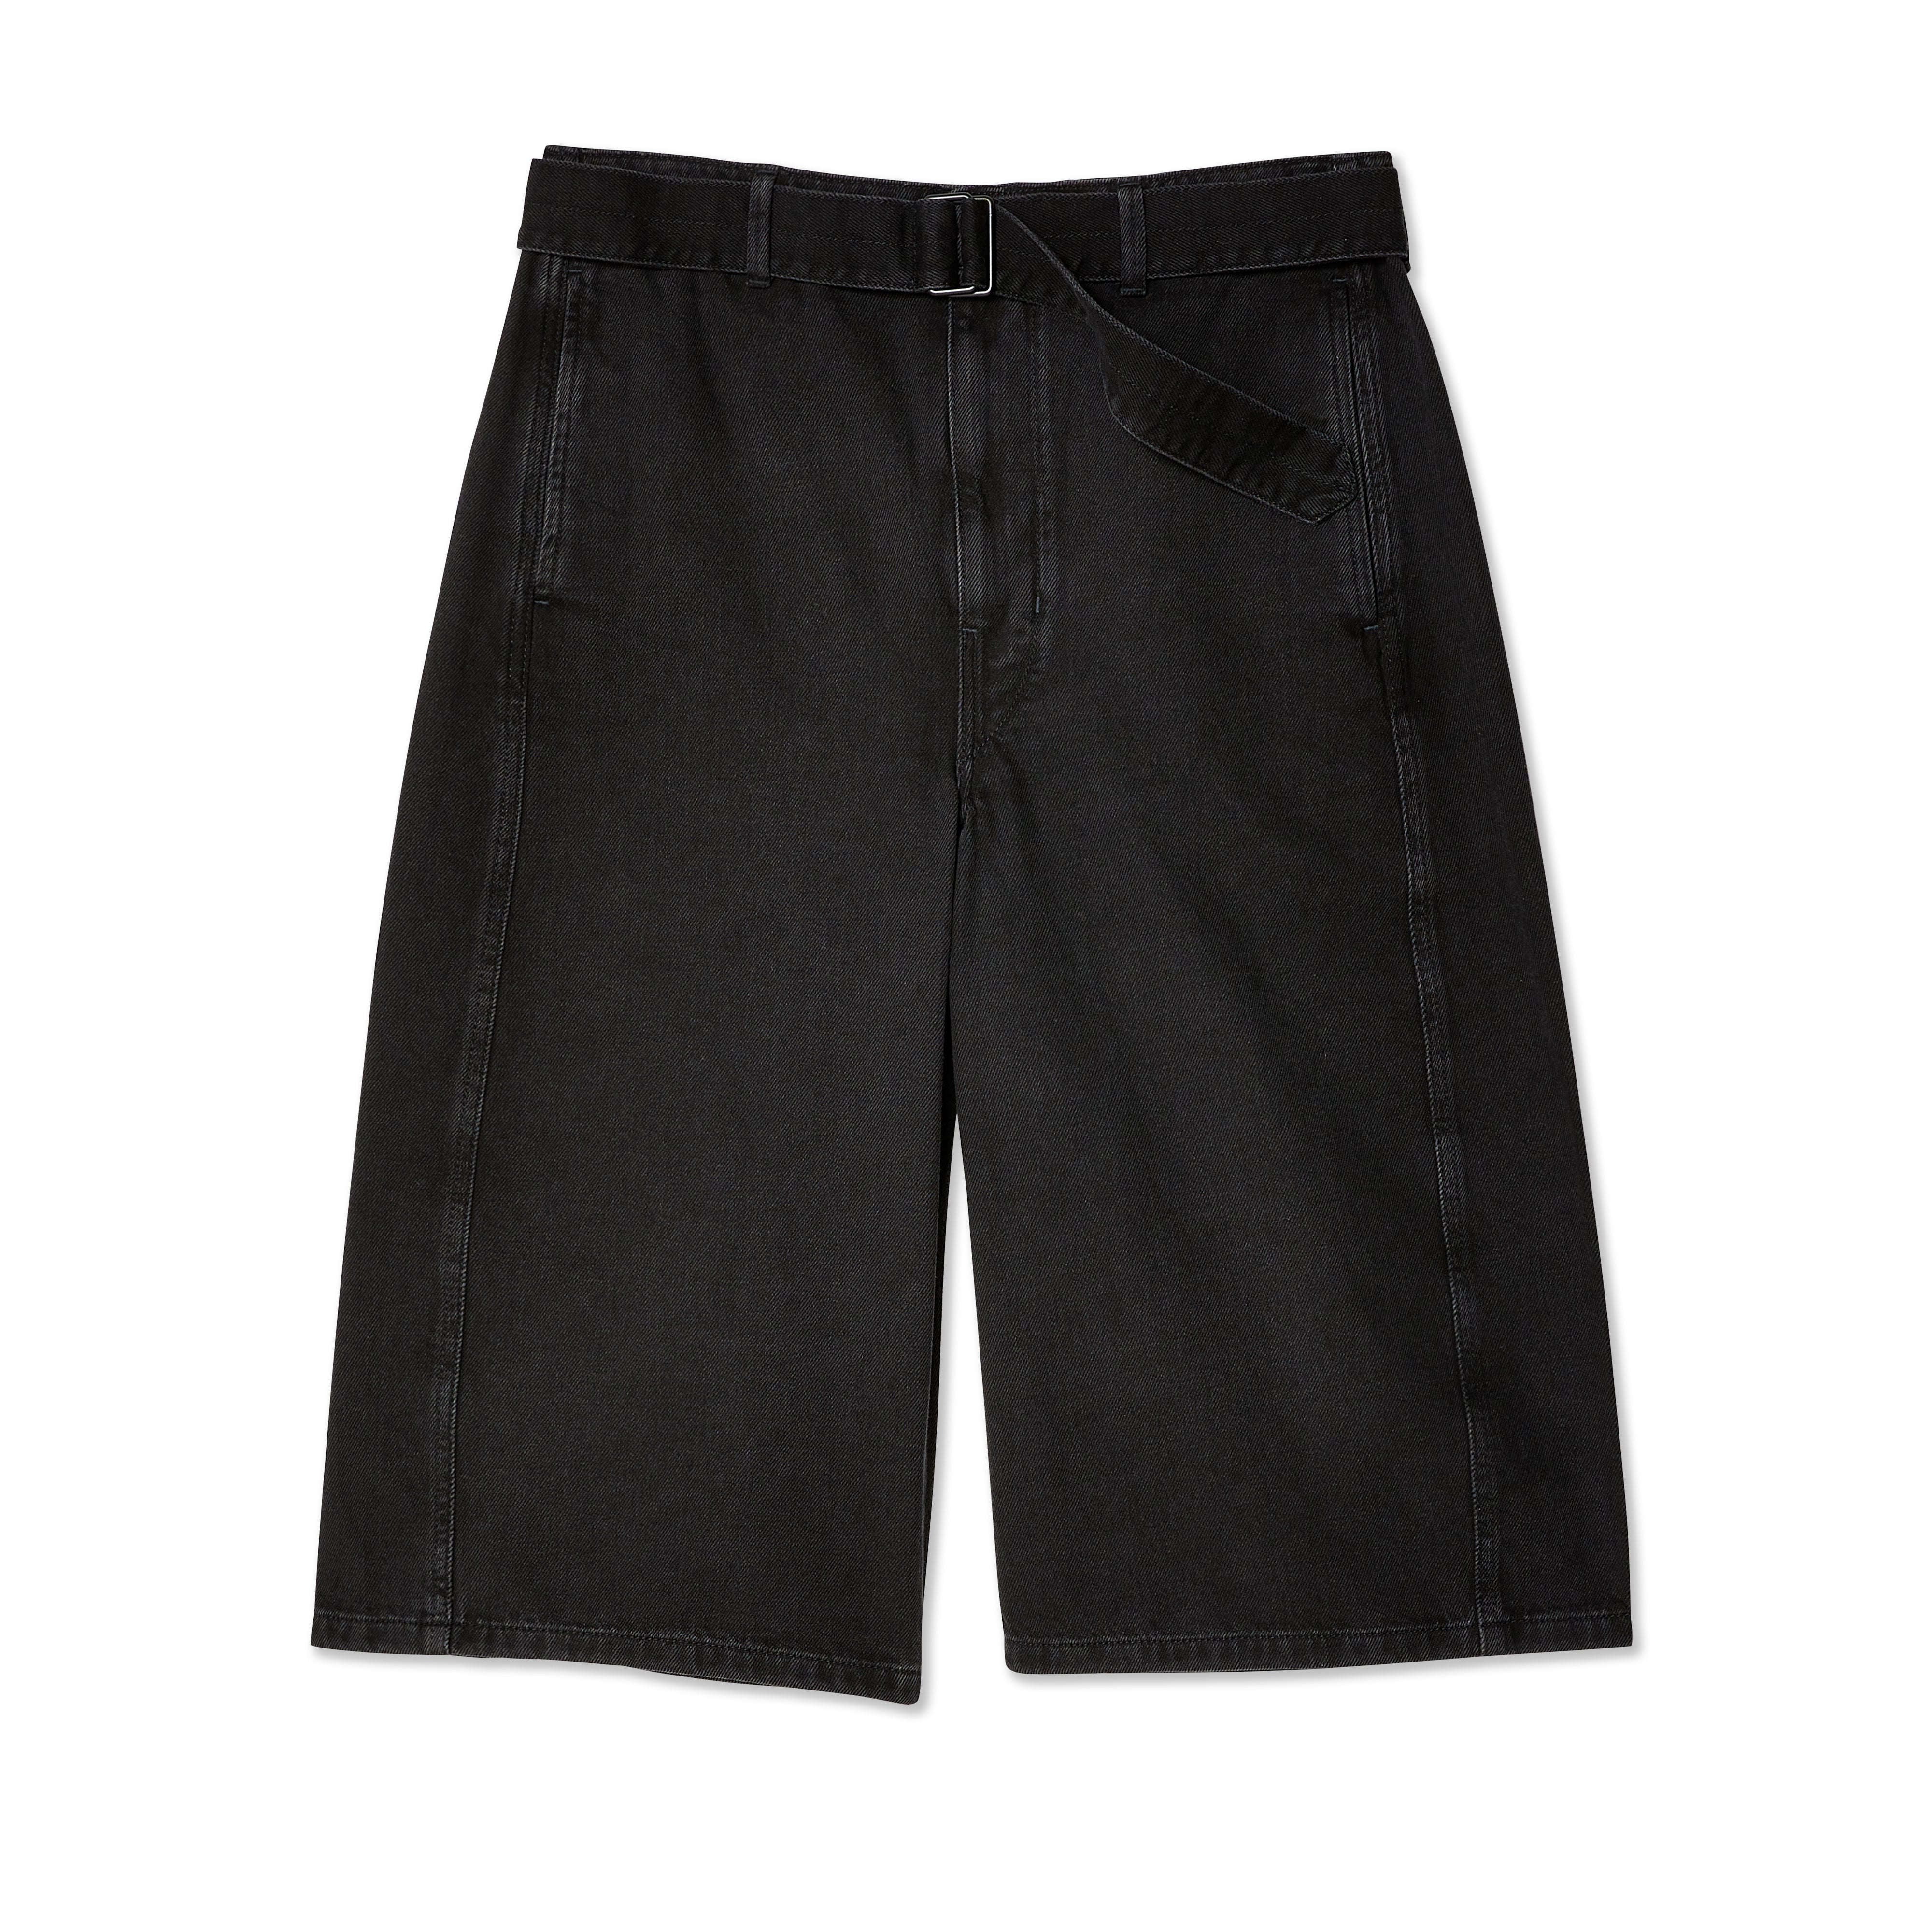 LEMAIRE Black Tailored Shorts